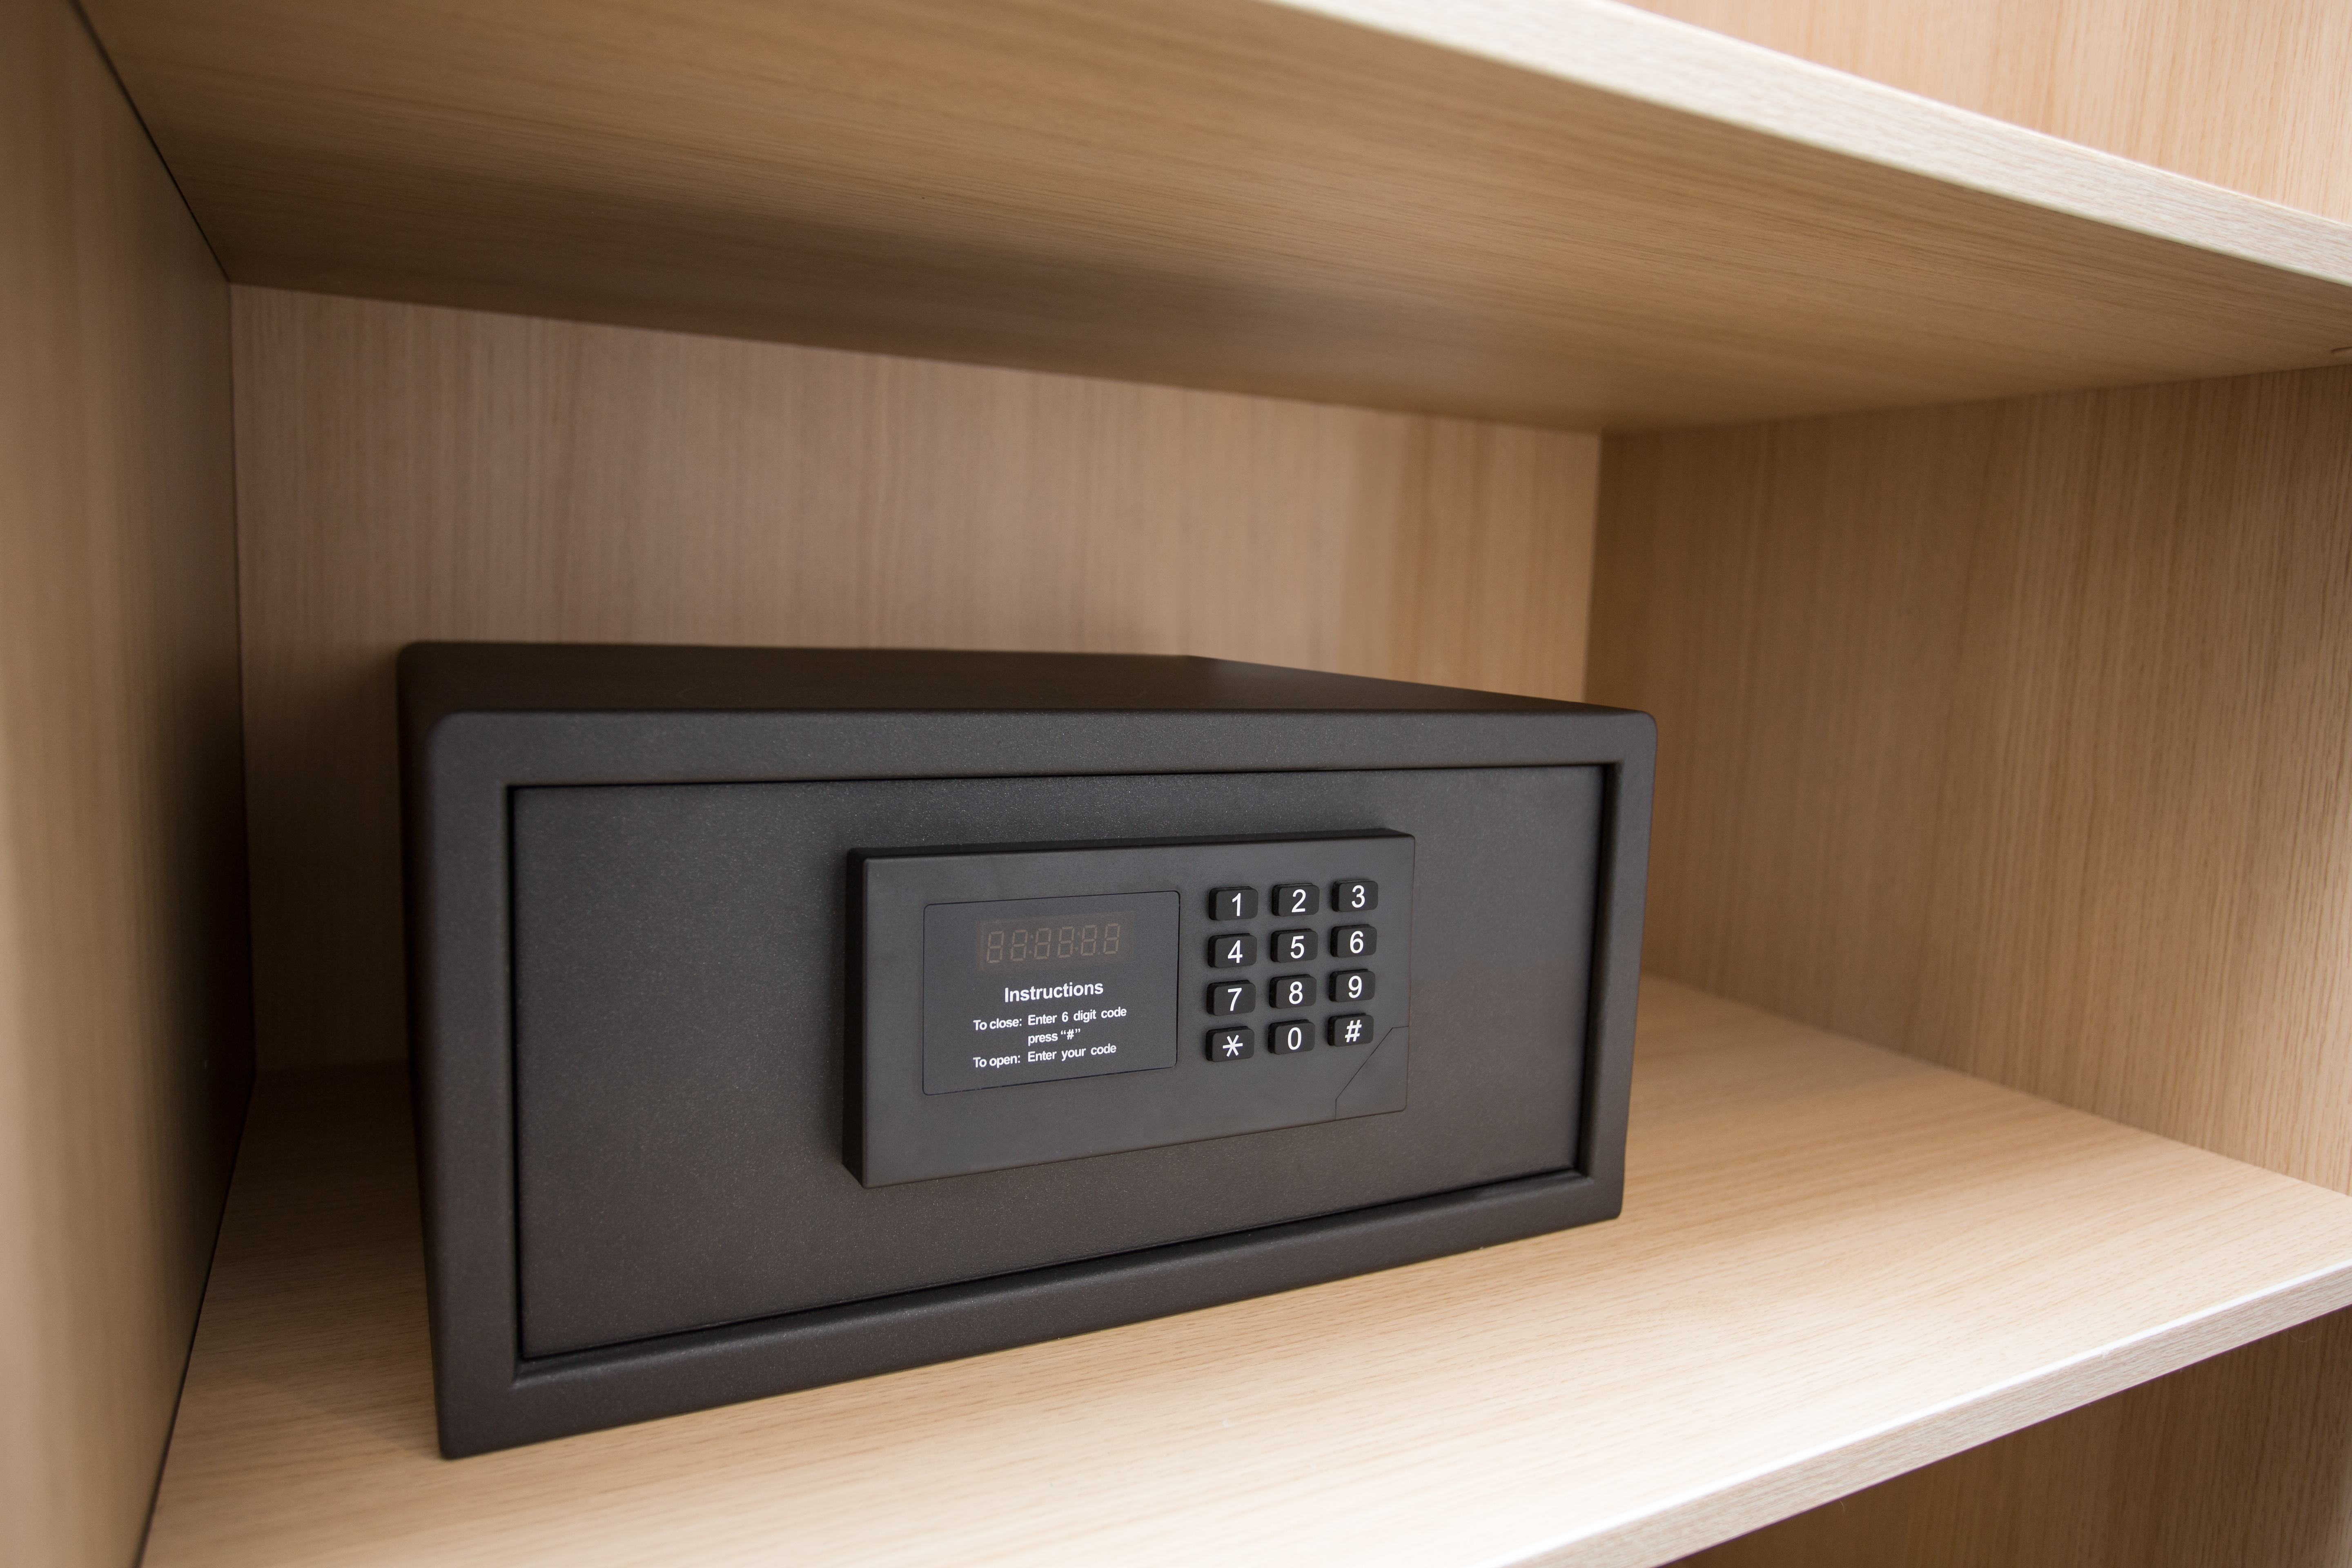 Why Install a Safe in Your House?